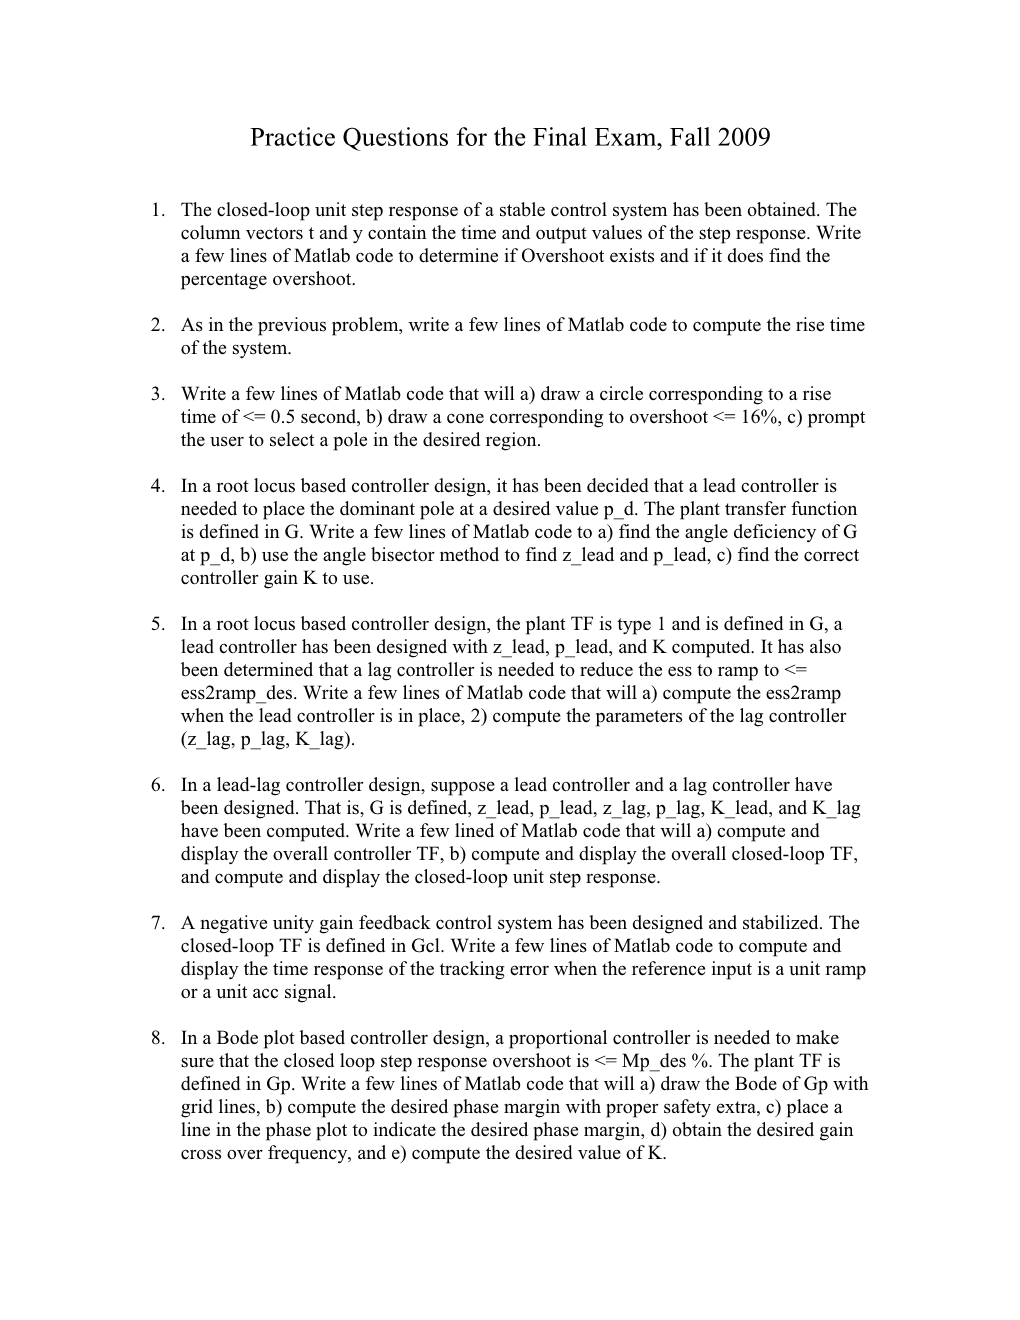 Practice Questions for the Final Exam, Fall 2009